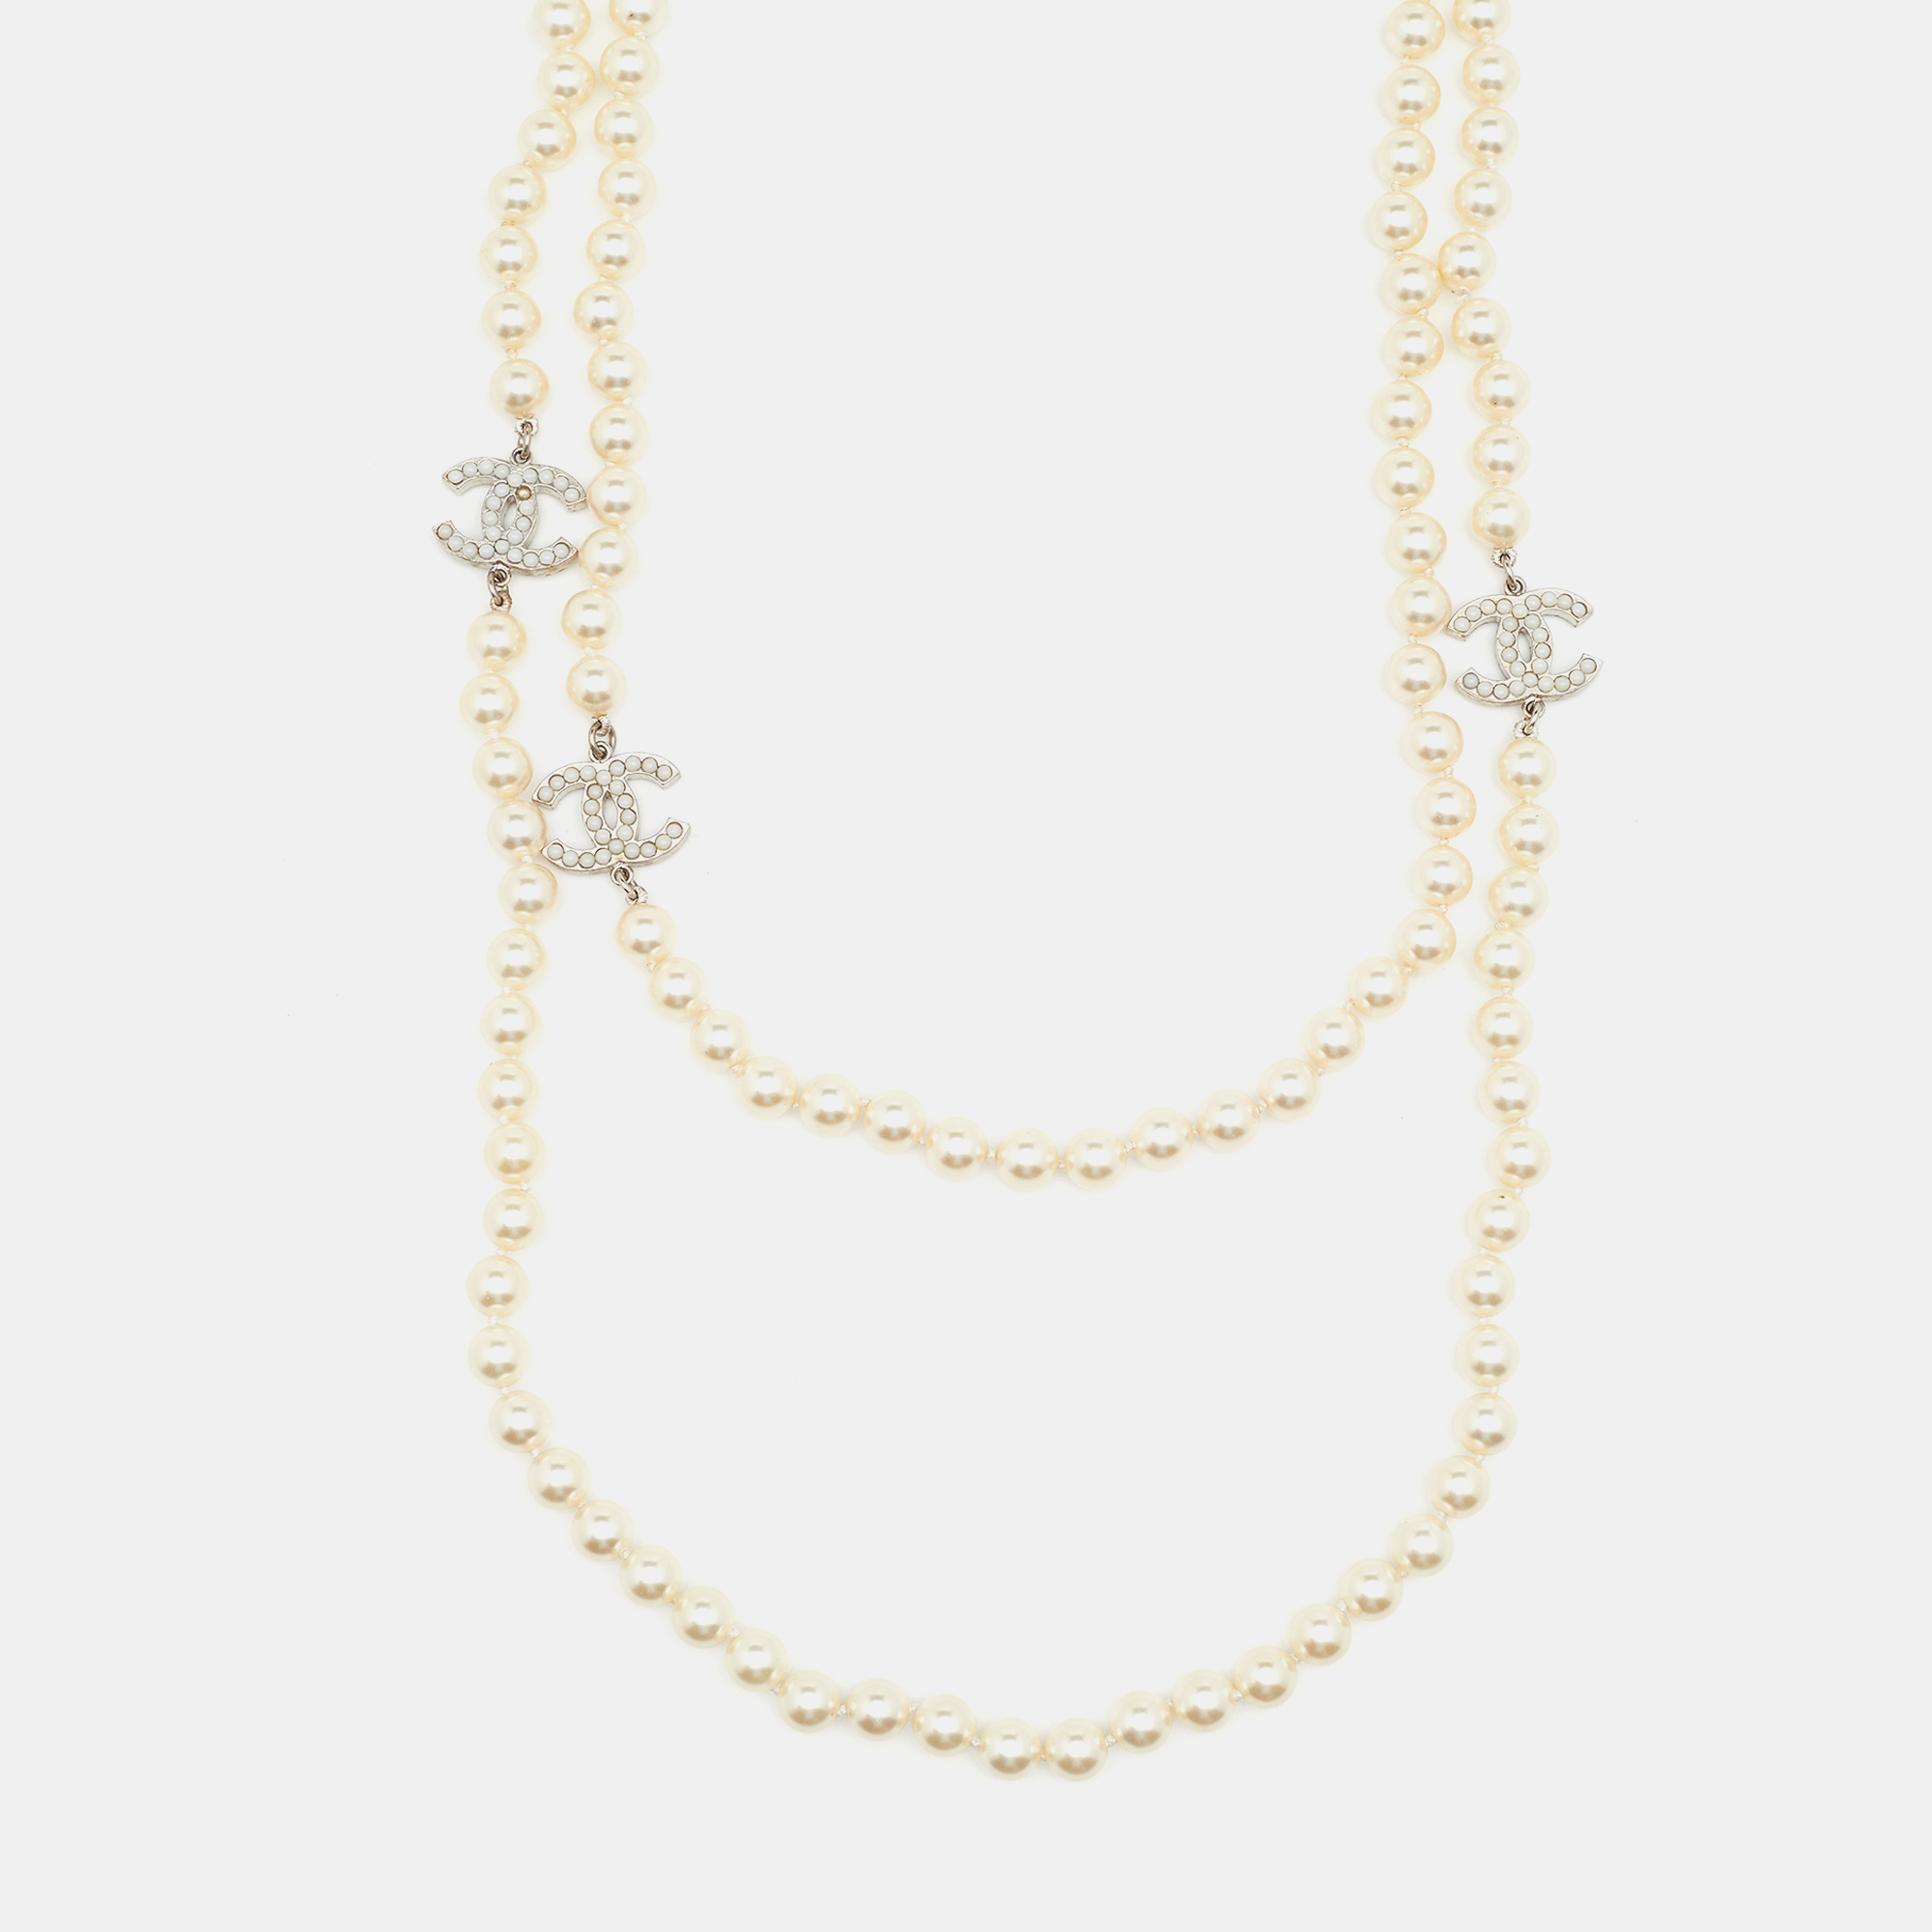 Chanel Strass CC Faux Pearl Double Layered Necklace Chanel